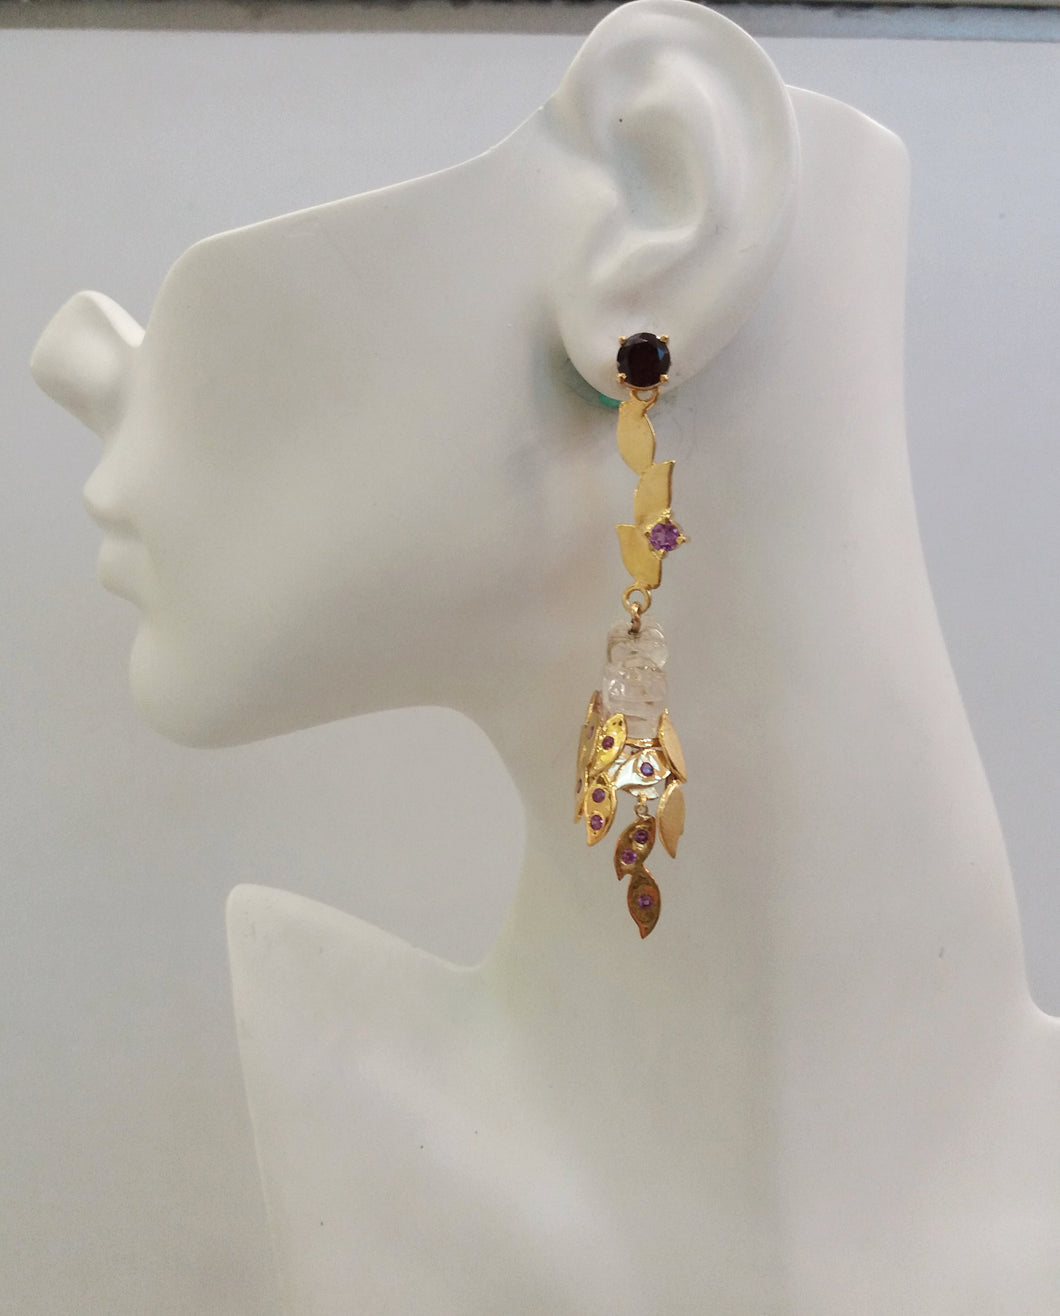 'Foliage' Twinset Earrings with Garnets, Amethysts & Rock Crystal carved Dragon